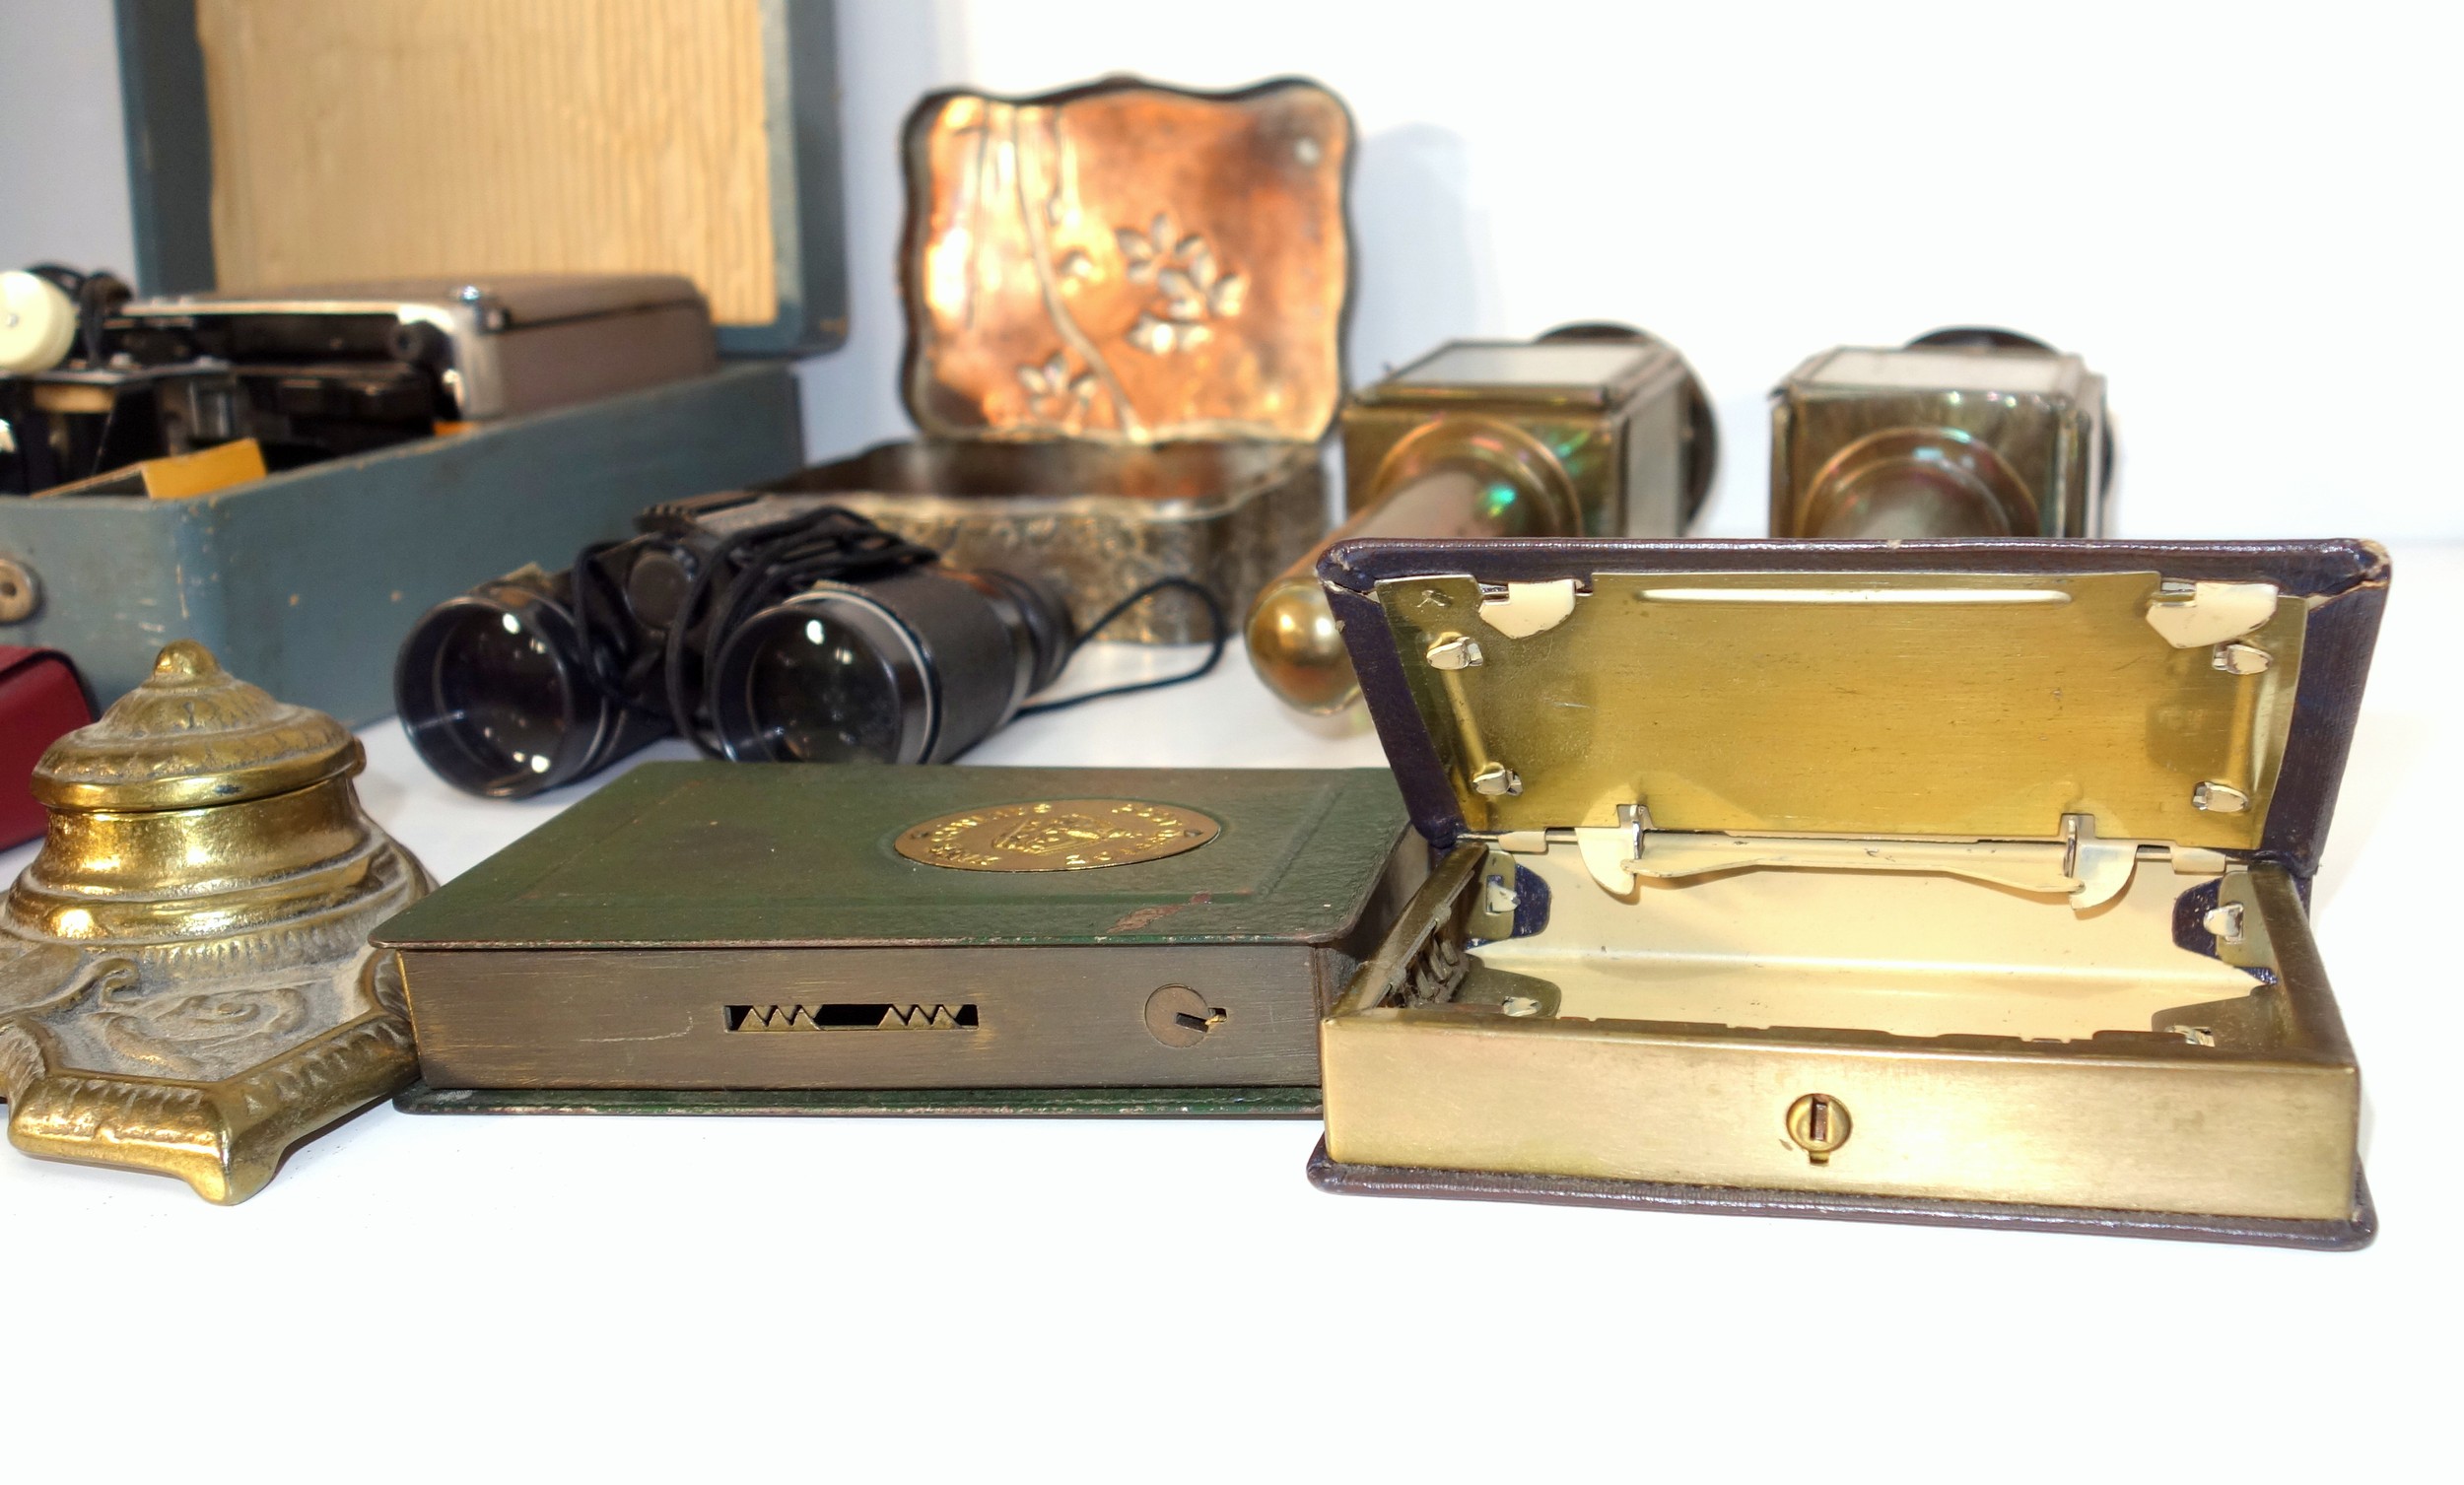 Stereoscope viewer with 3 slides, miniature Singer Sewing machine, Minolta Mini Slide Projector Kit, - Image 6 of 11